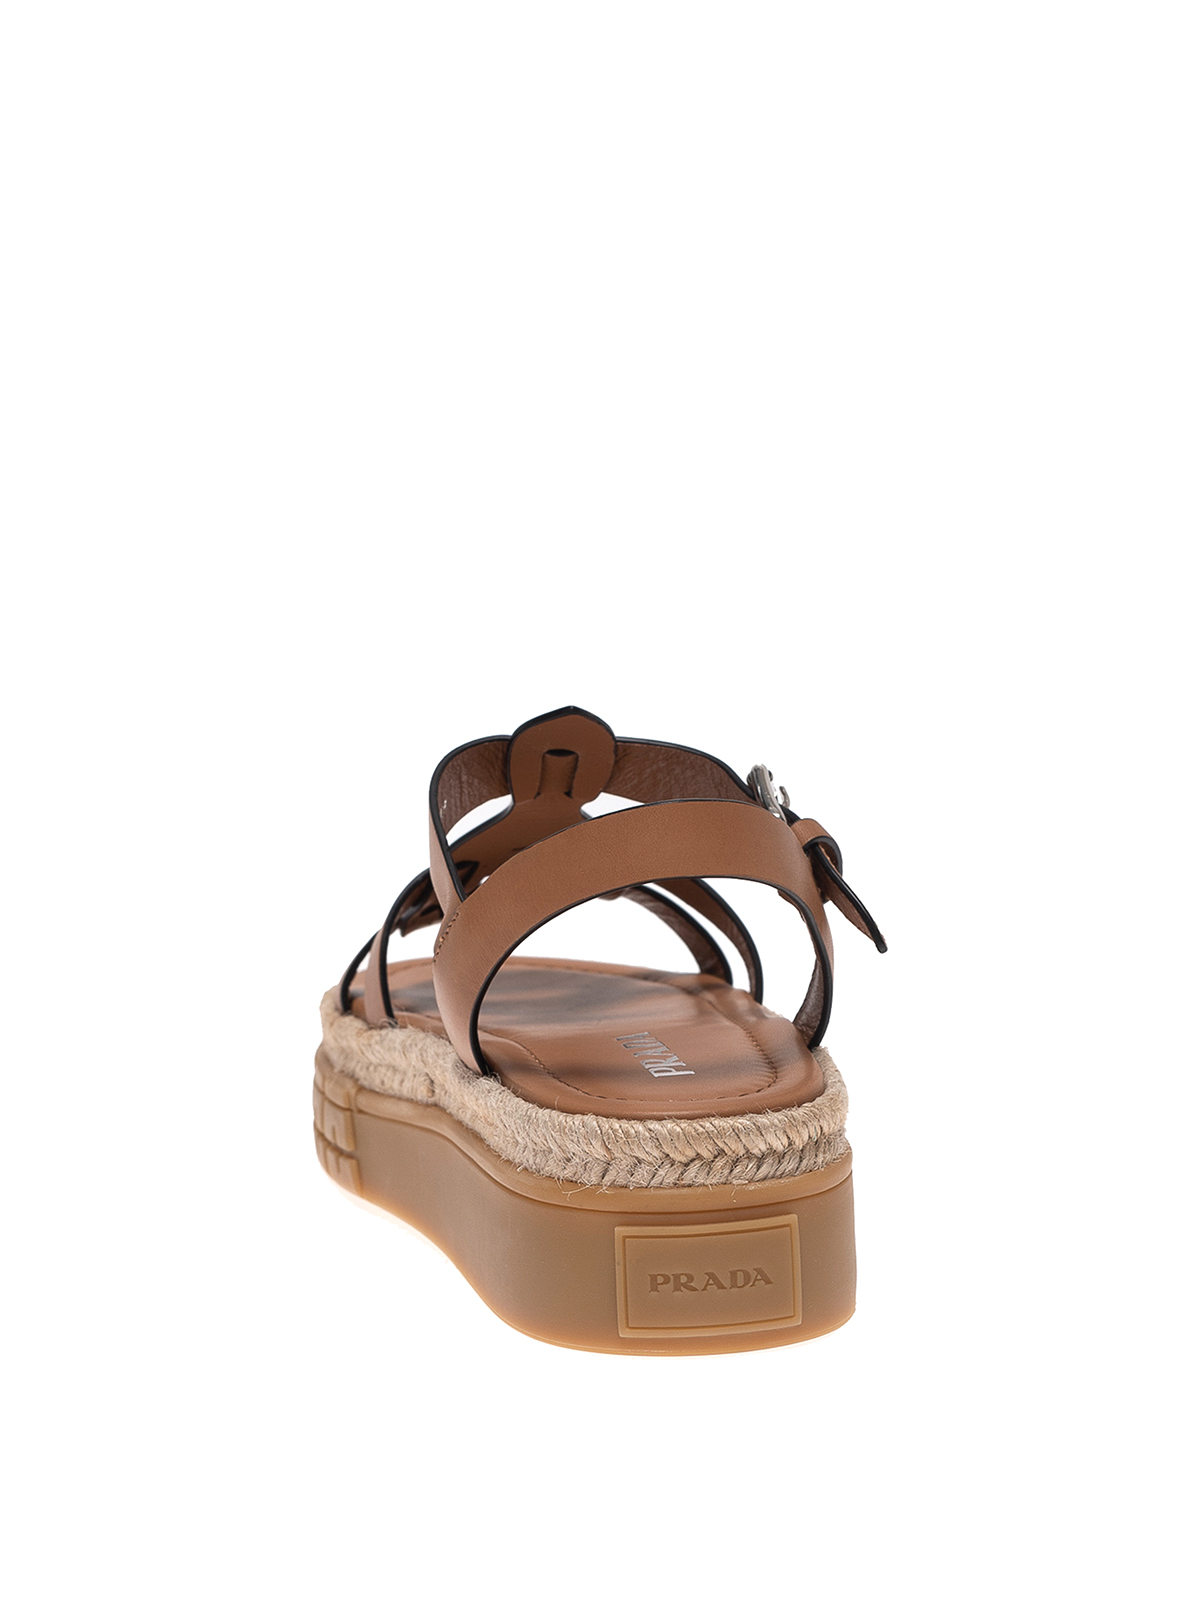 Espadrilles style leather sandals 